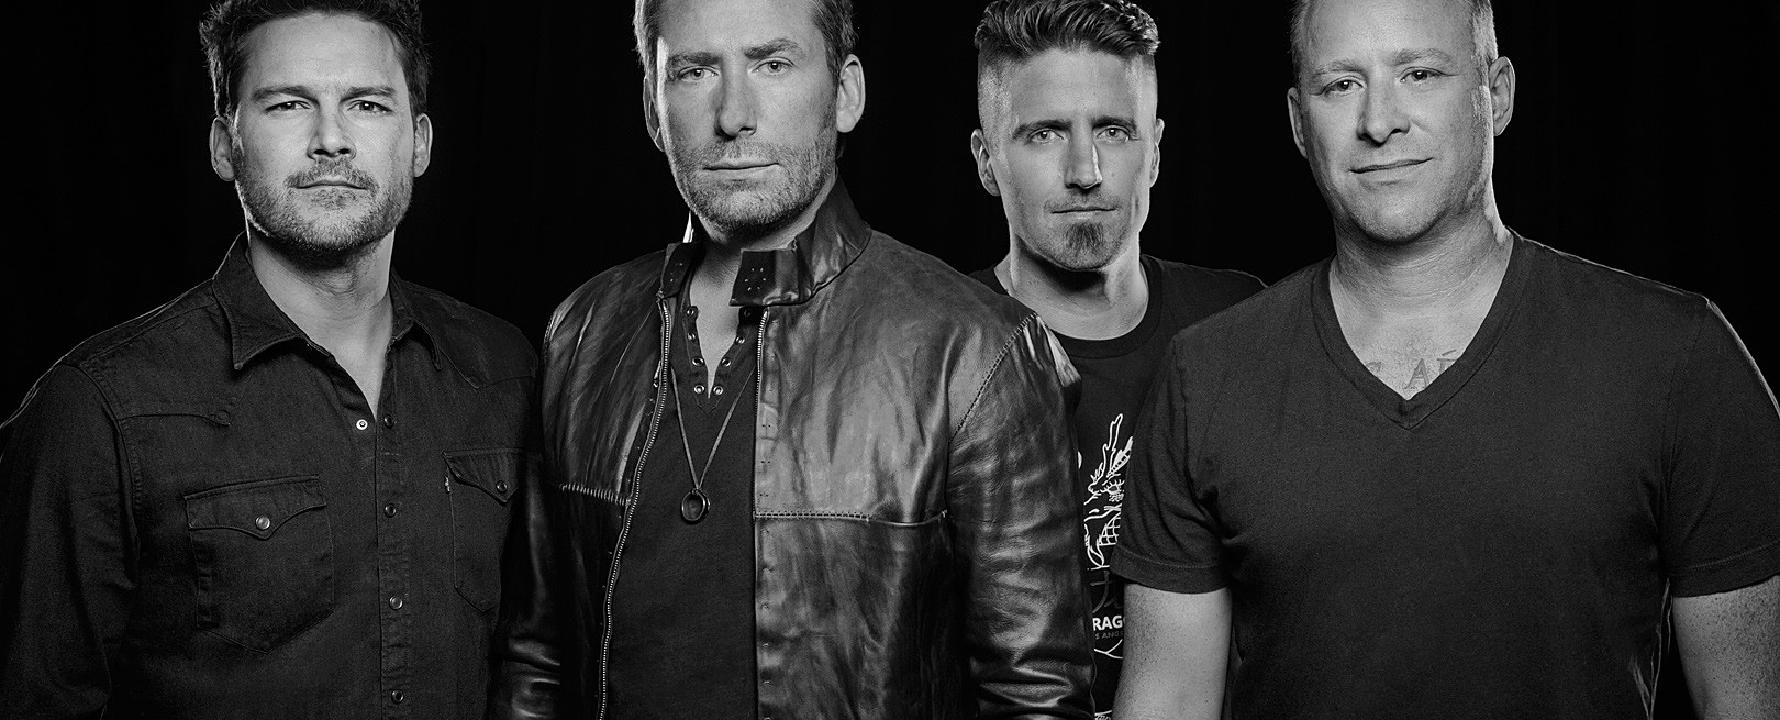 Promotional photograph of Nickelback.